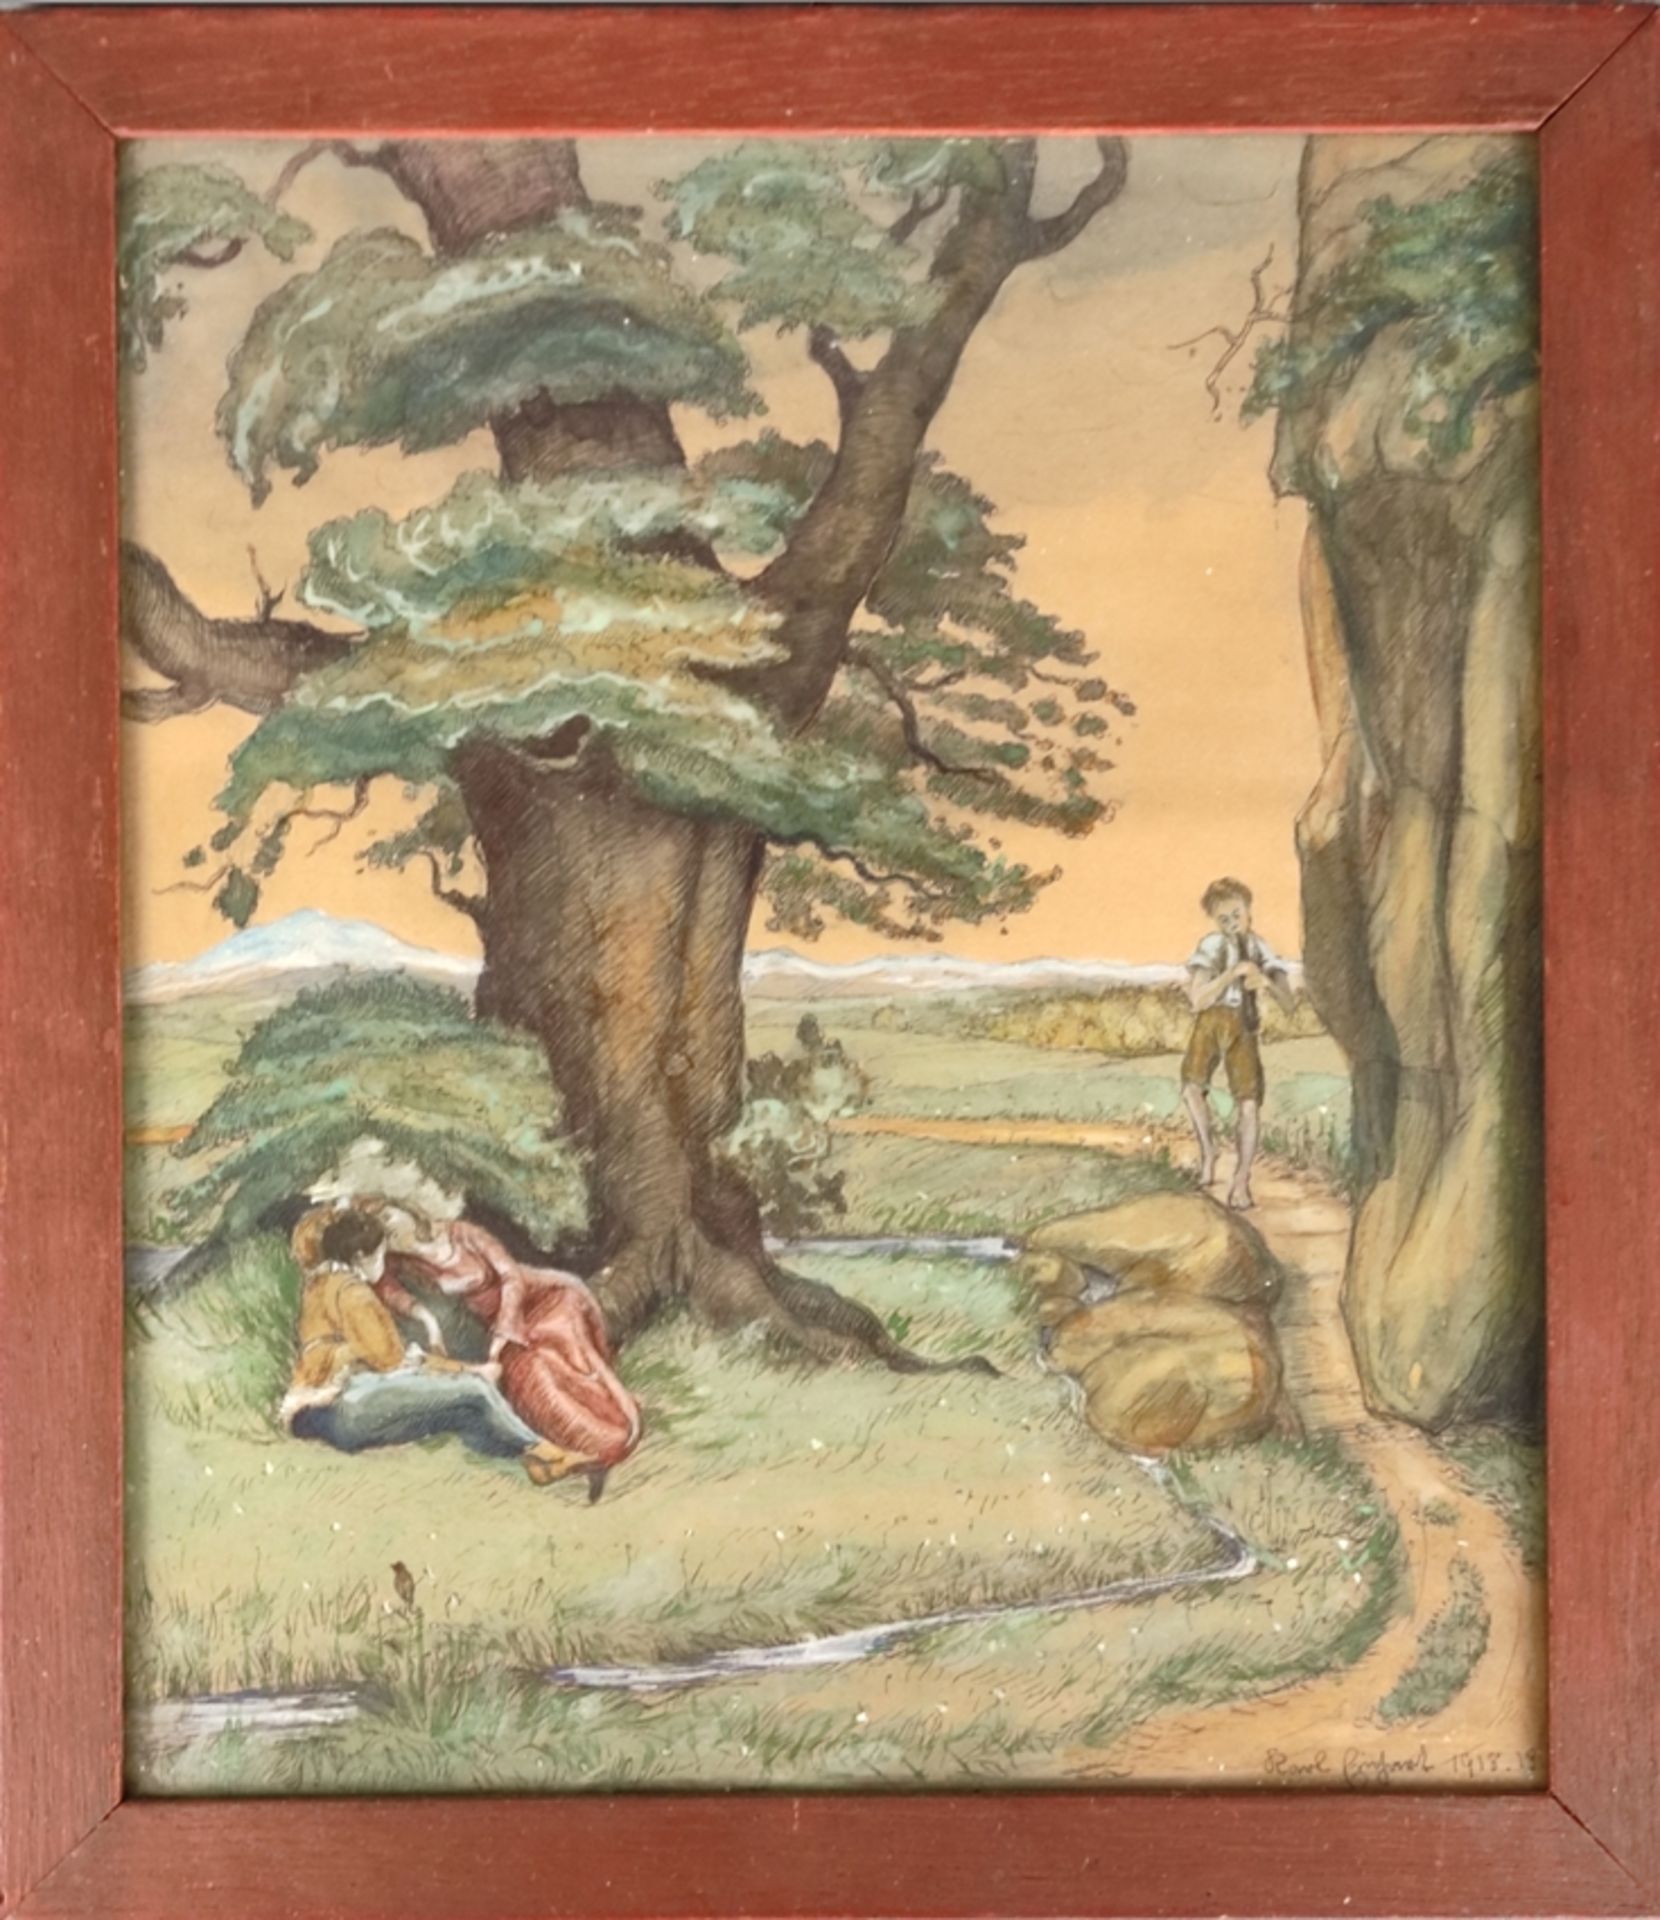 Einhart, Karl (1884-1967 Constance) "Flute player with lovers", lying under oak tree on meadow, wat - Image 2 of 3